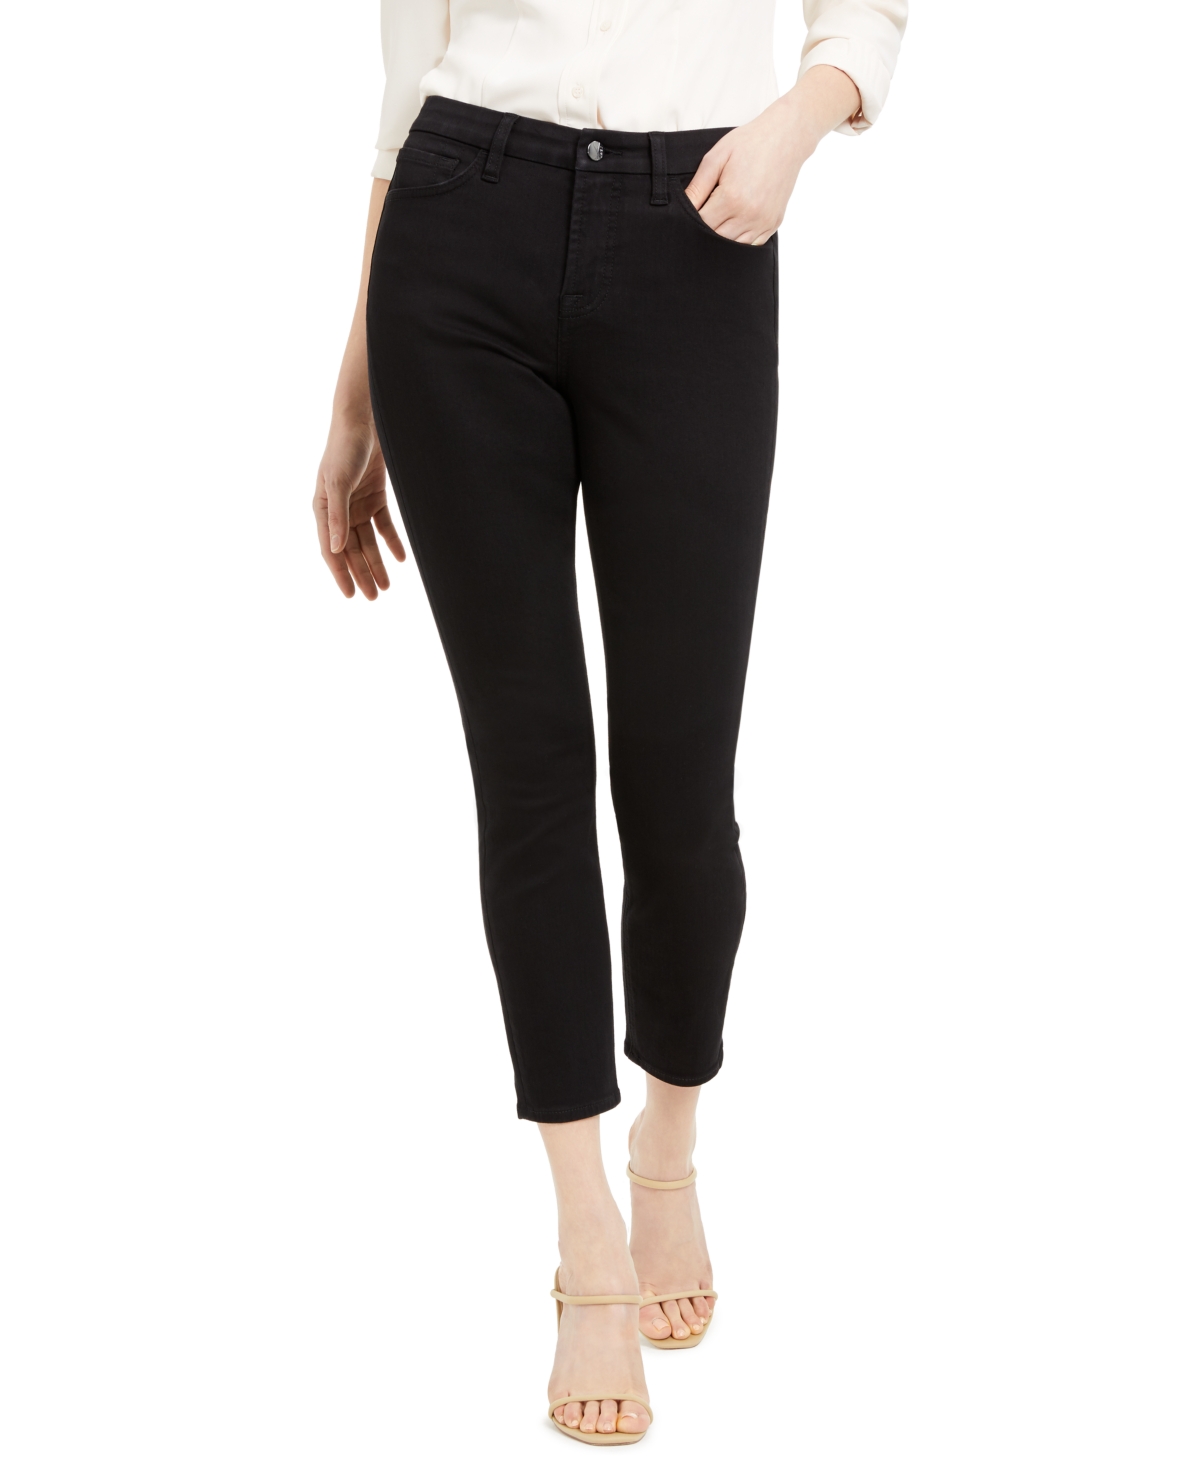  JEN7 by 7 For All Mankind Skinny Ankle Jeans